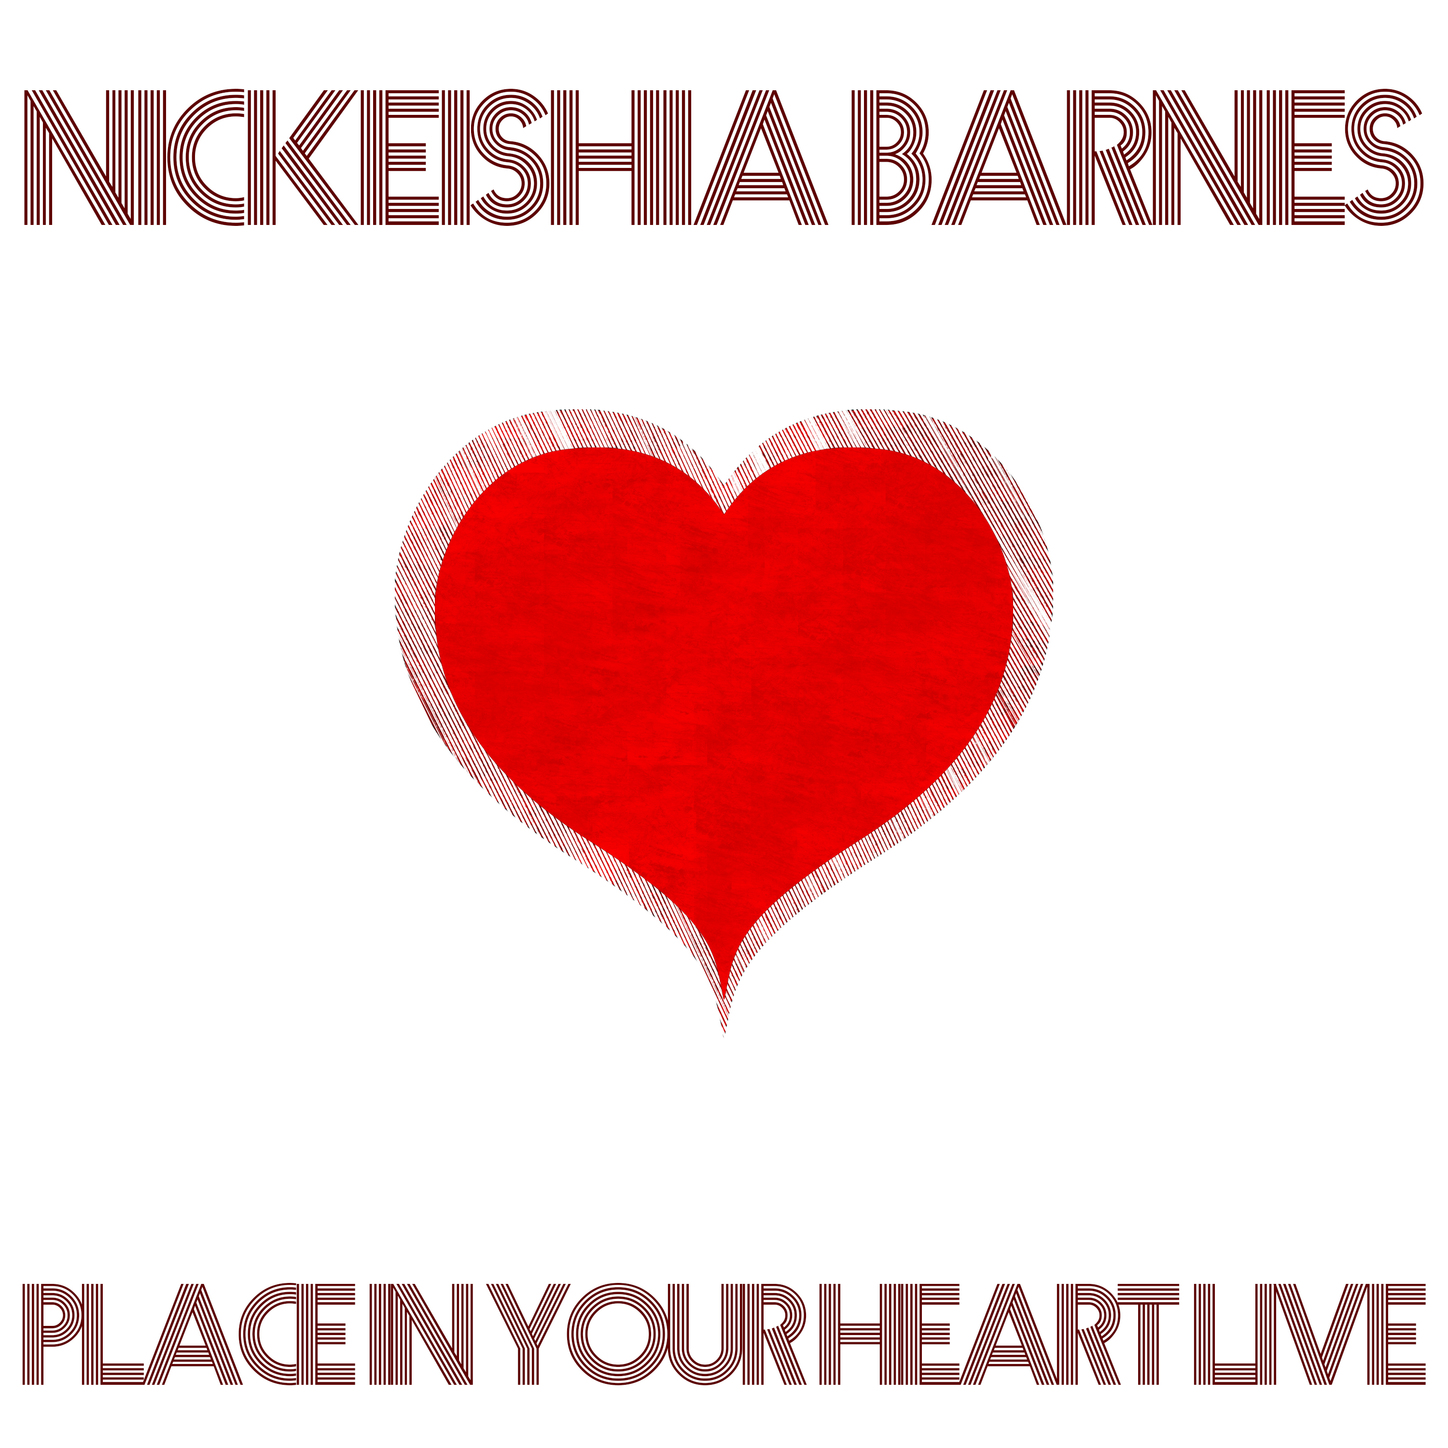 Place In Your Heart Live